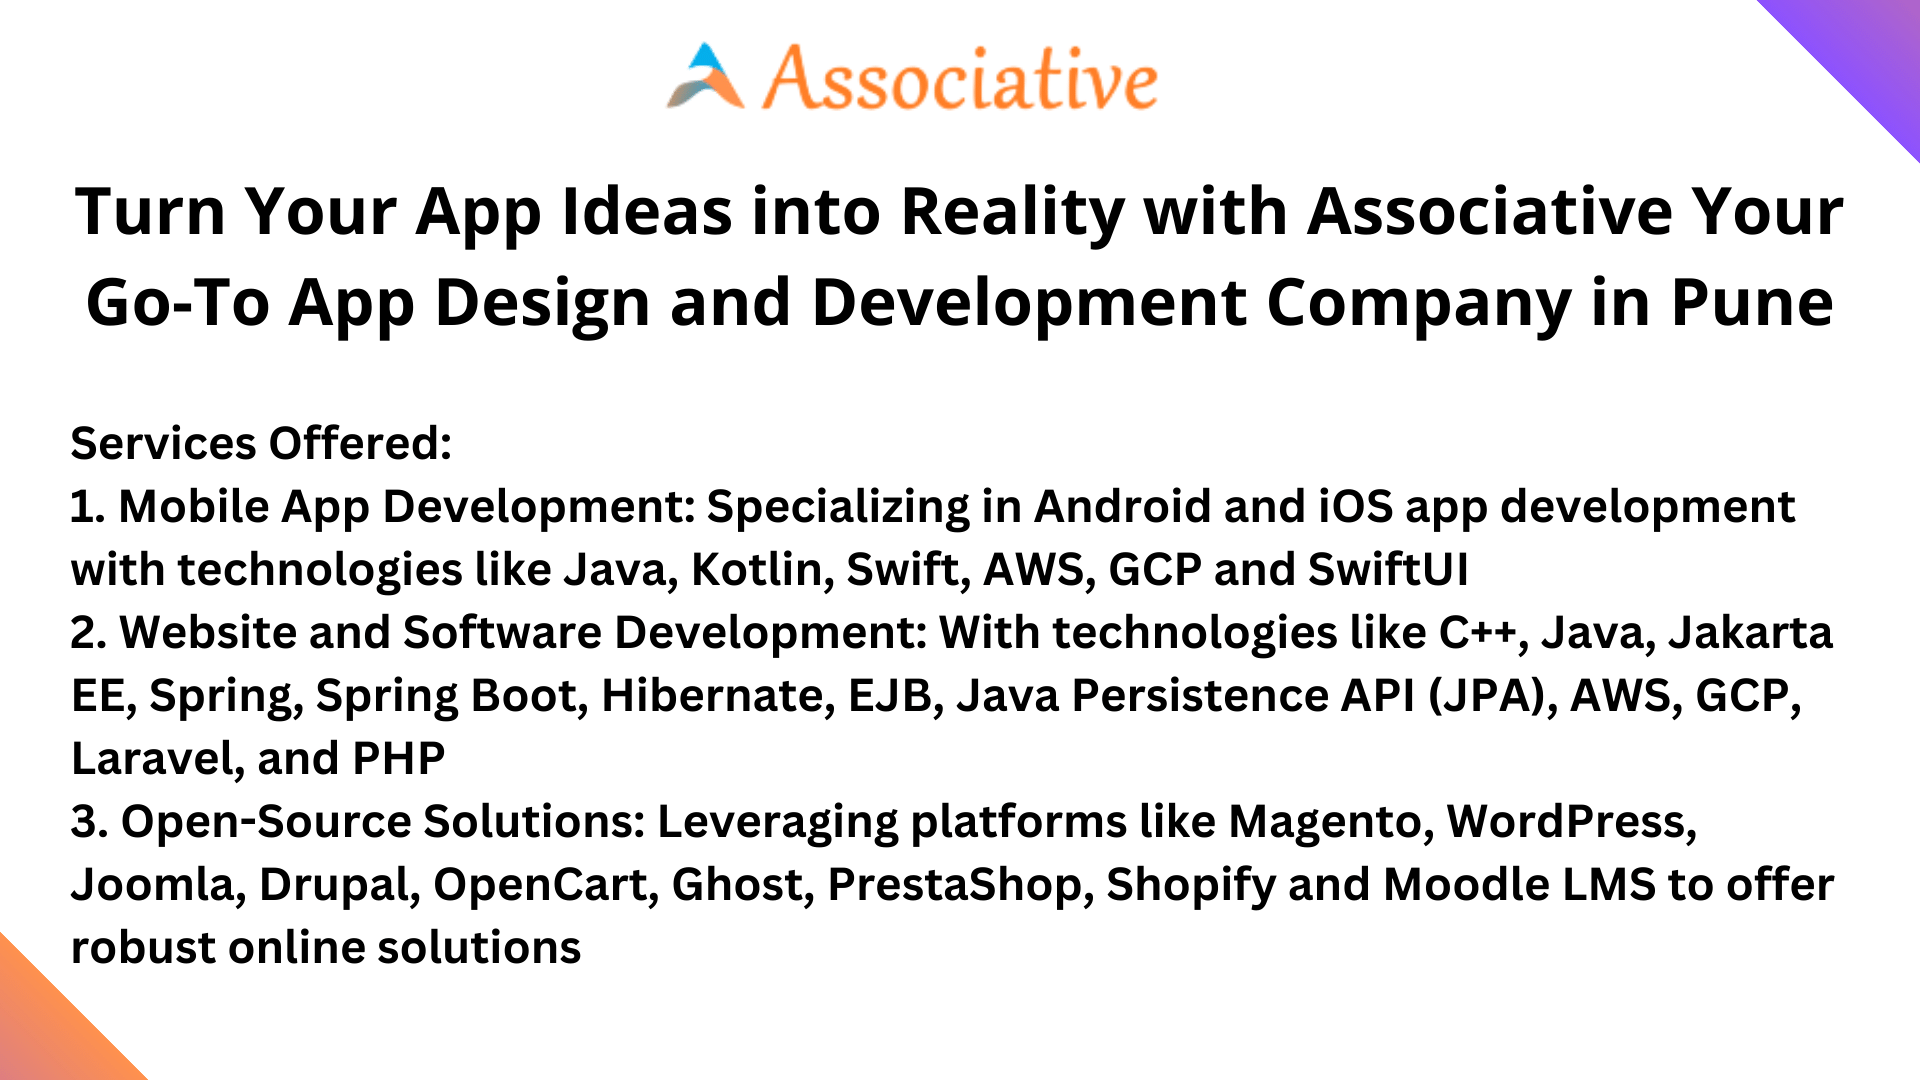 Turn Your App Ideas into Reality with Associative Your Go-To App Design and Development Company in Pune